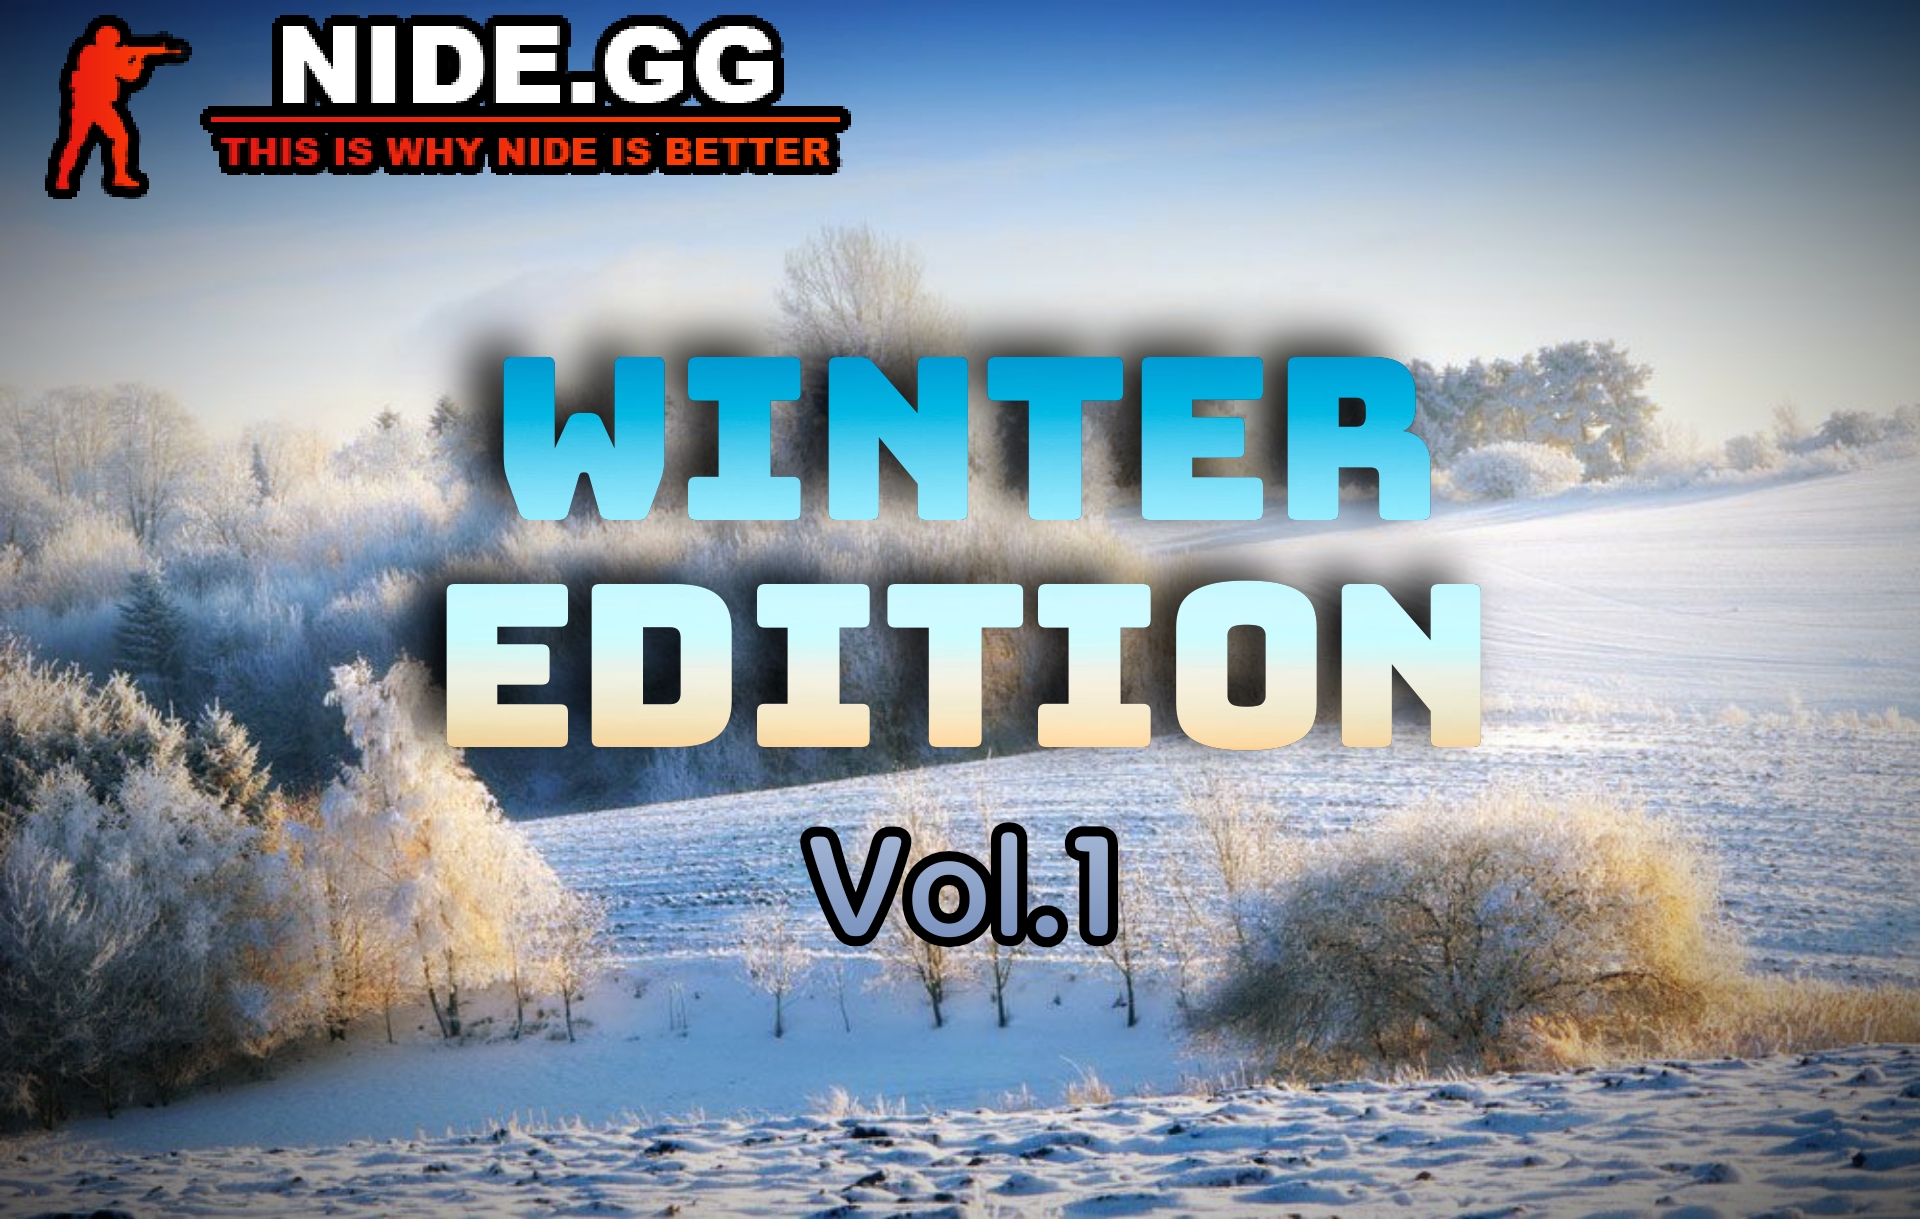 More information about "Event #92 - Winter Edition Vol.1"